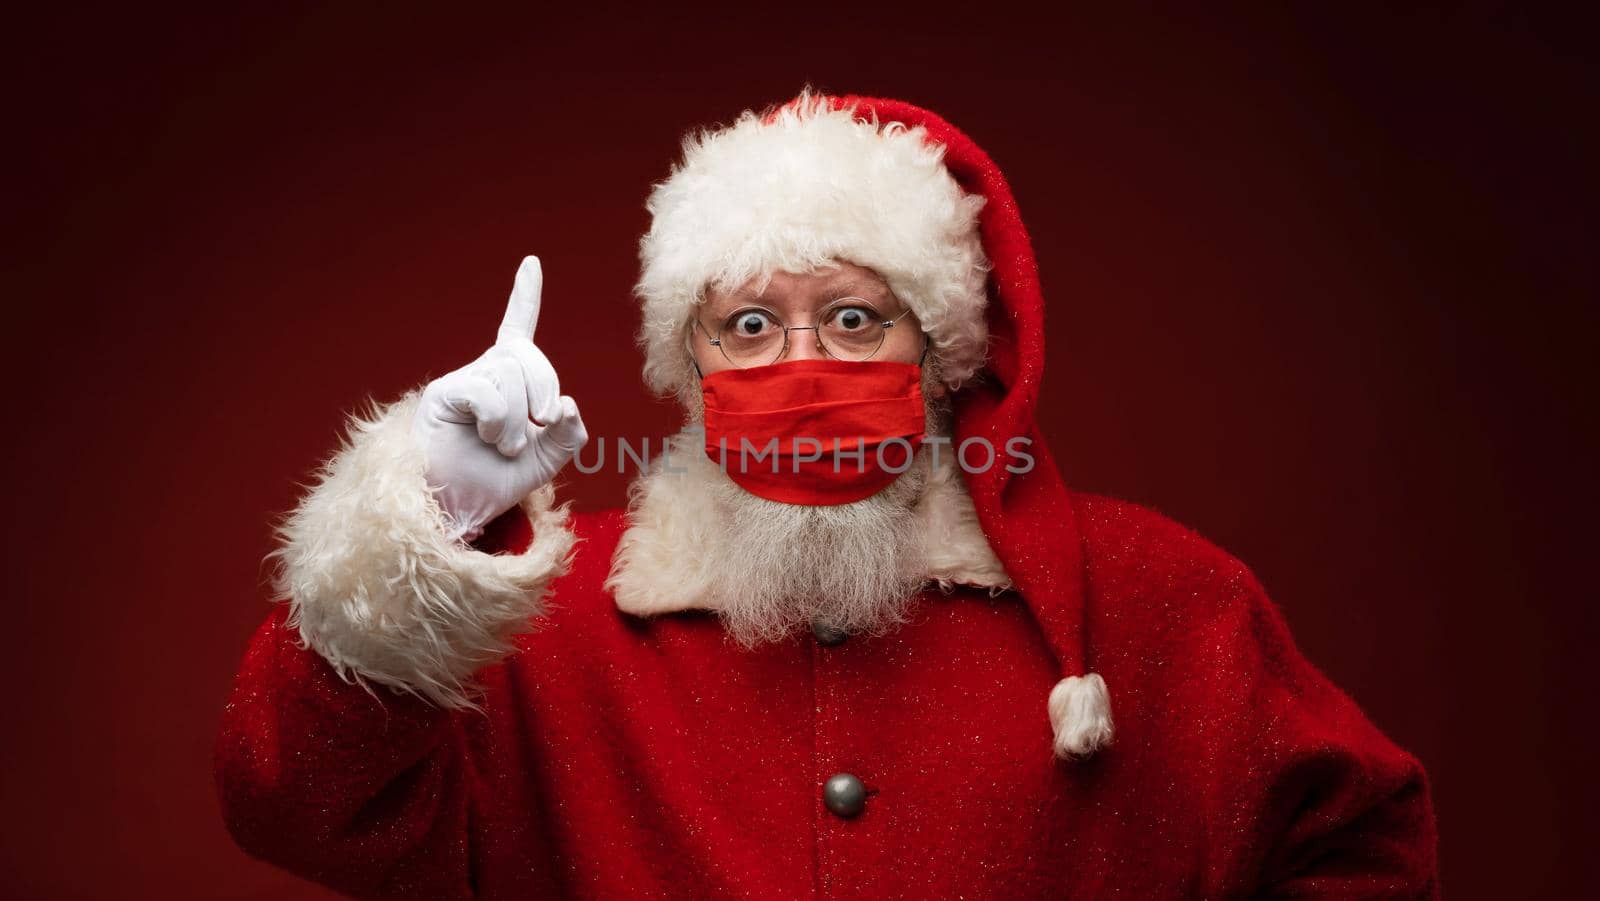 Santa Claus in medical mask by ALotOfPeople